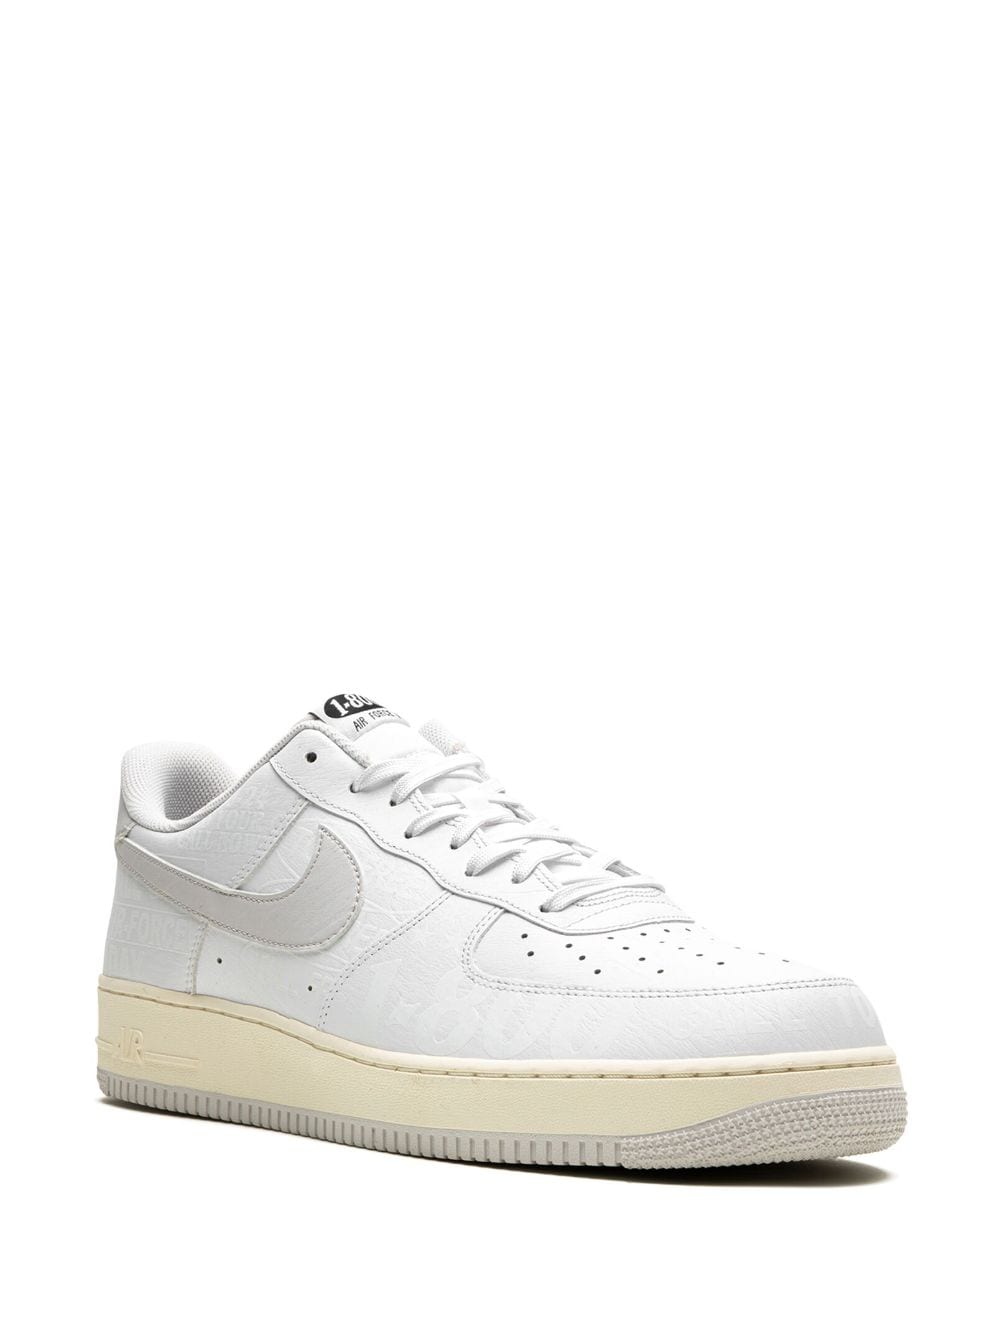 Shop Nike Air Force 1 '07 Prm "1-800" Sneakers In White